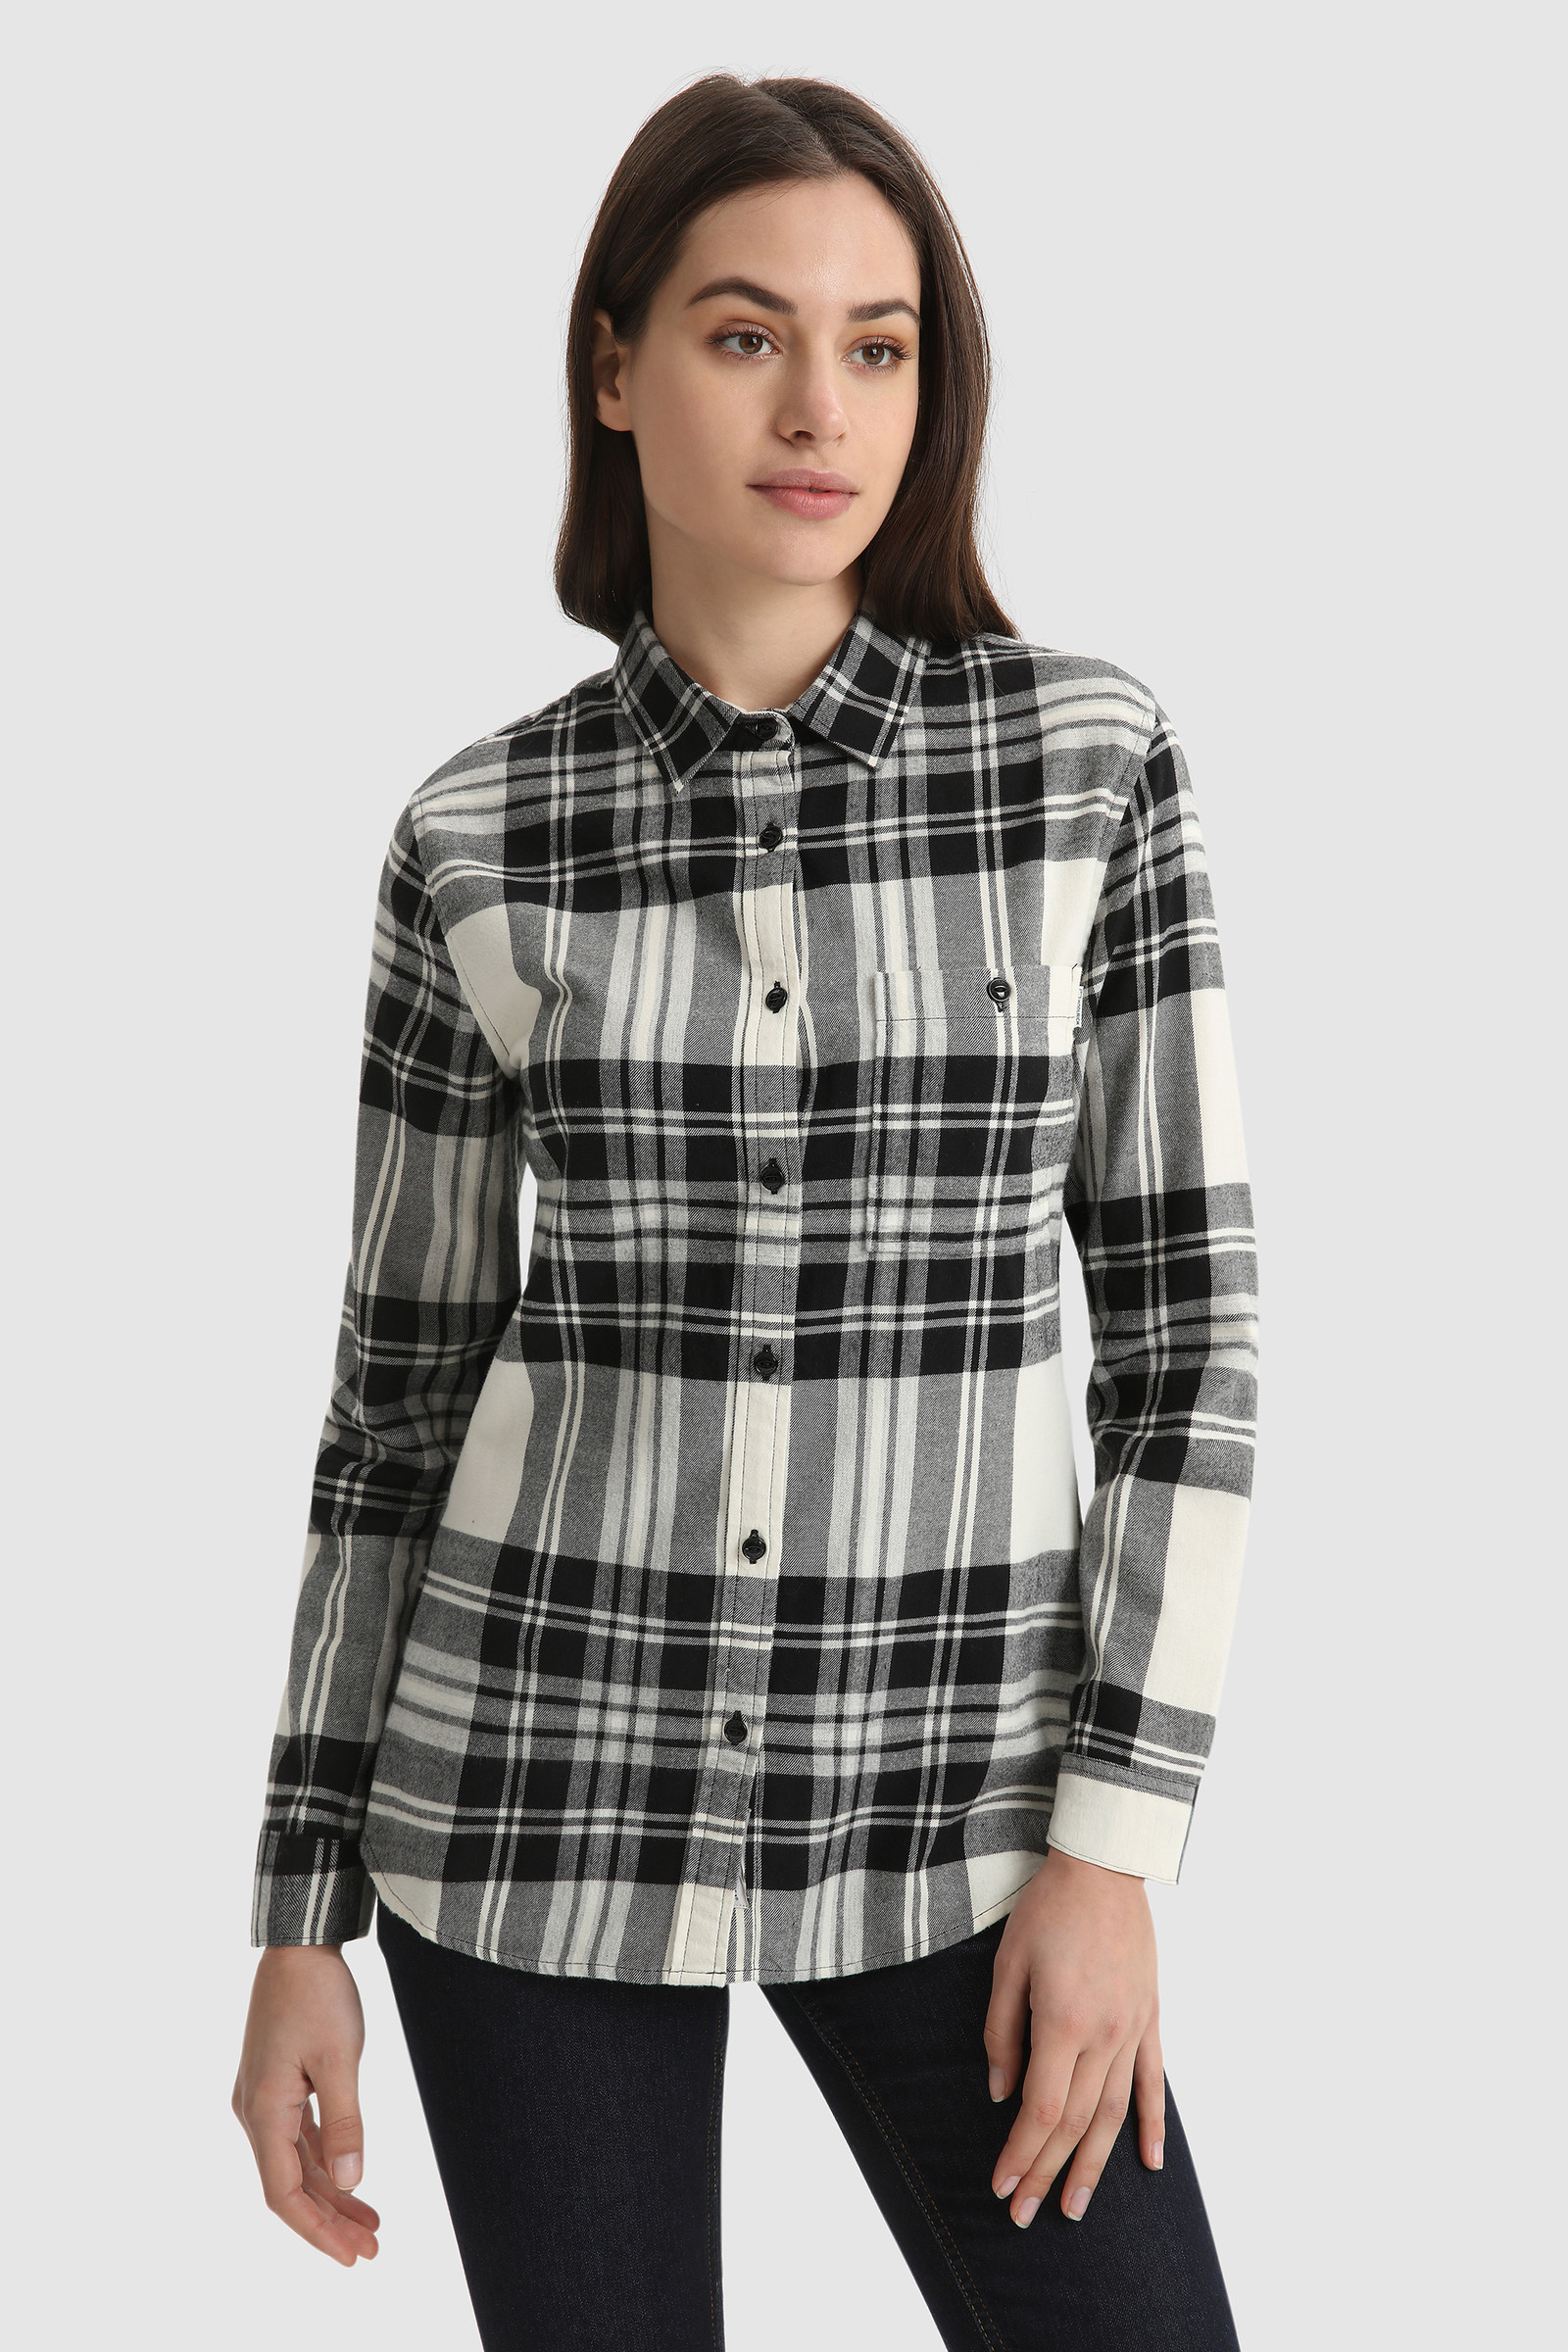 Womens White Flannel Shirt | vlr.eng.br